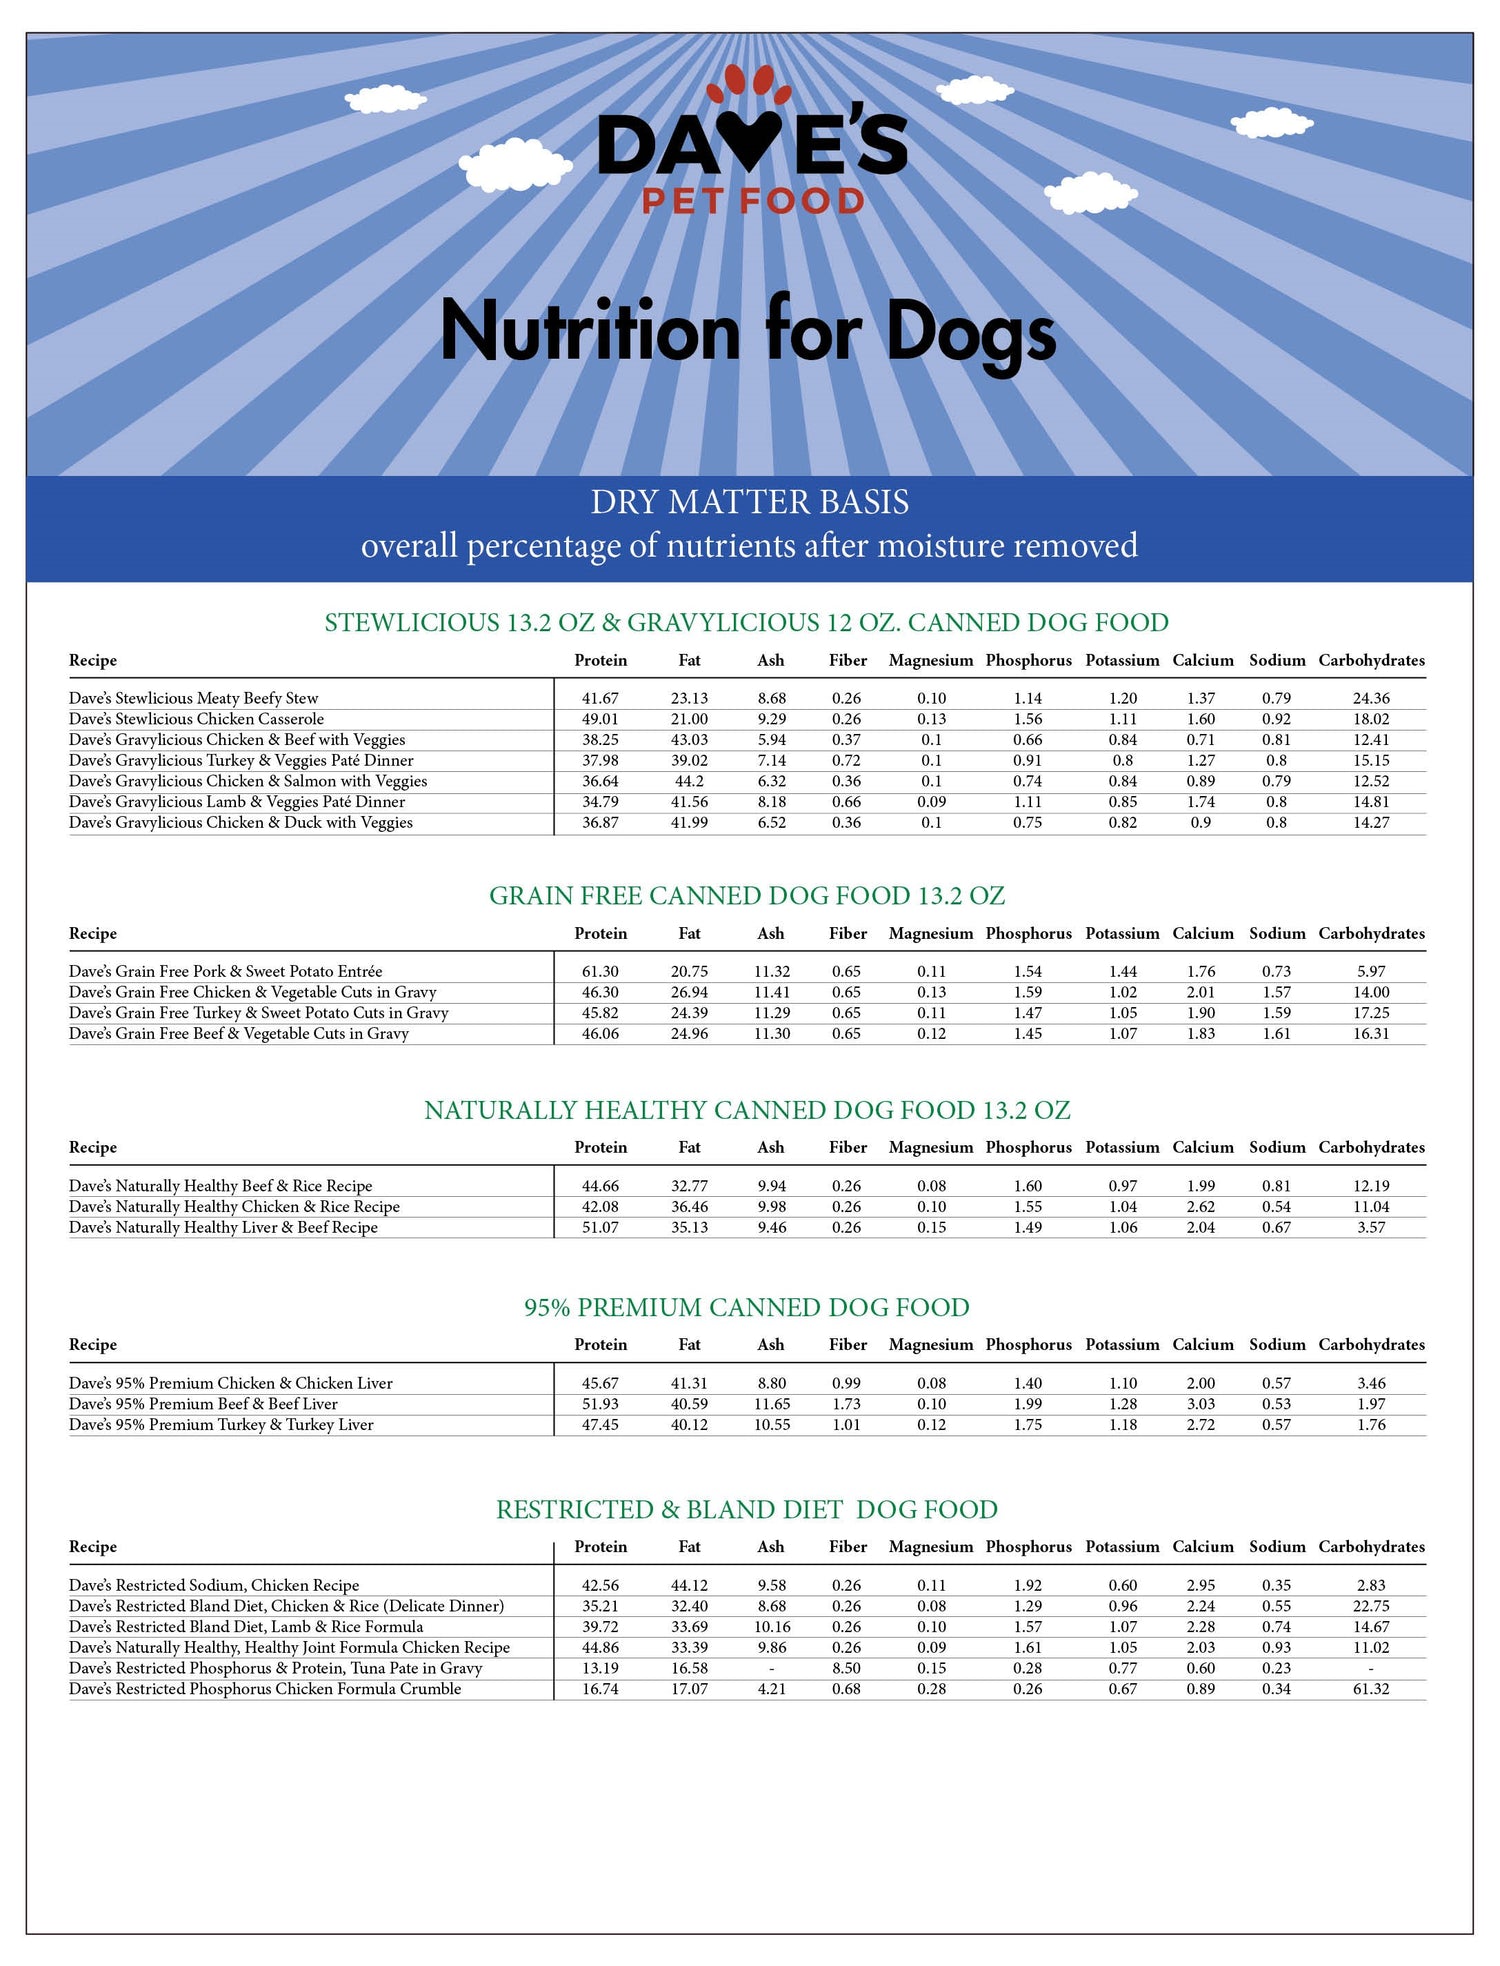 Dave's Pet Food Dry Matter Basis Nutritional Information for Dogs